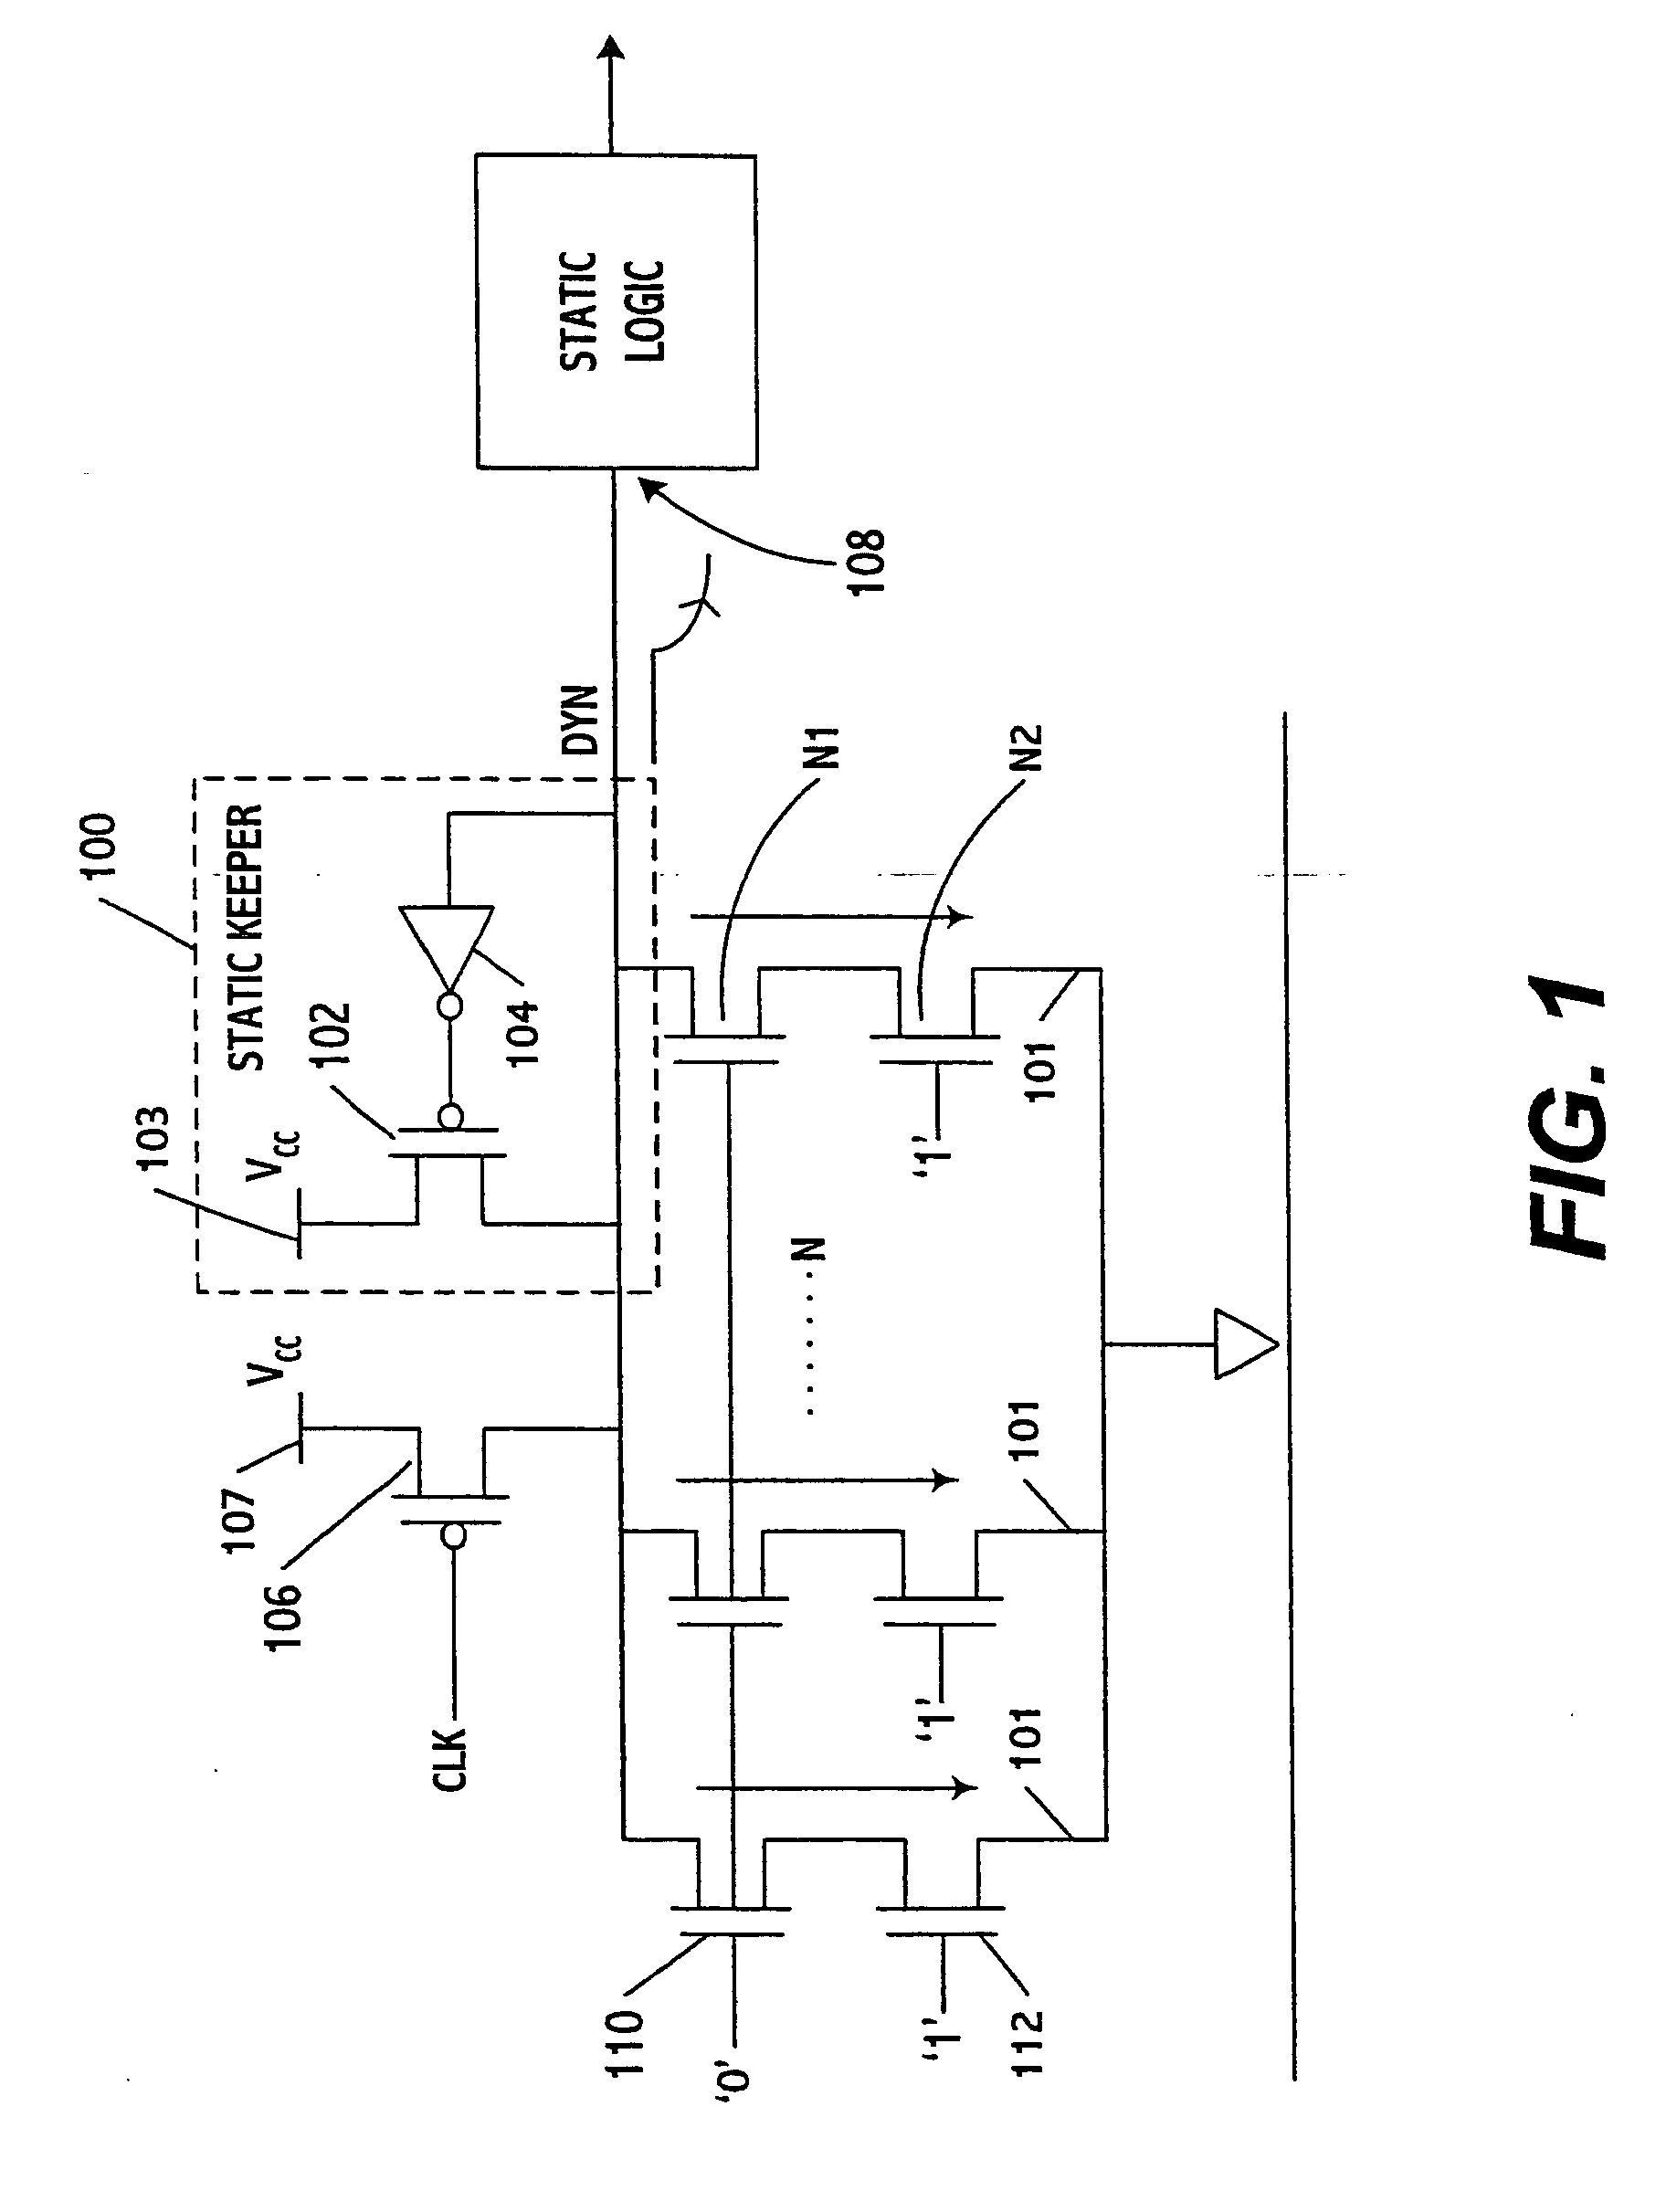 Current mirror multi-channel leakage current monitor circuit and method